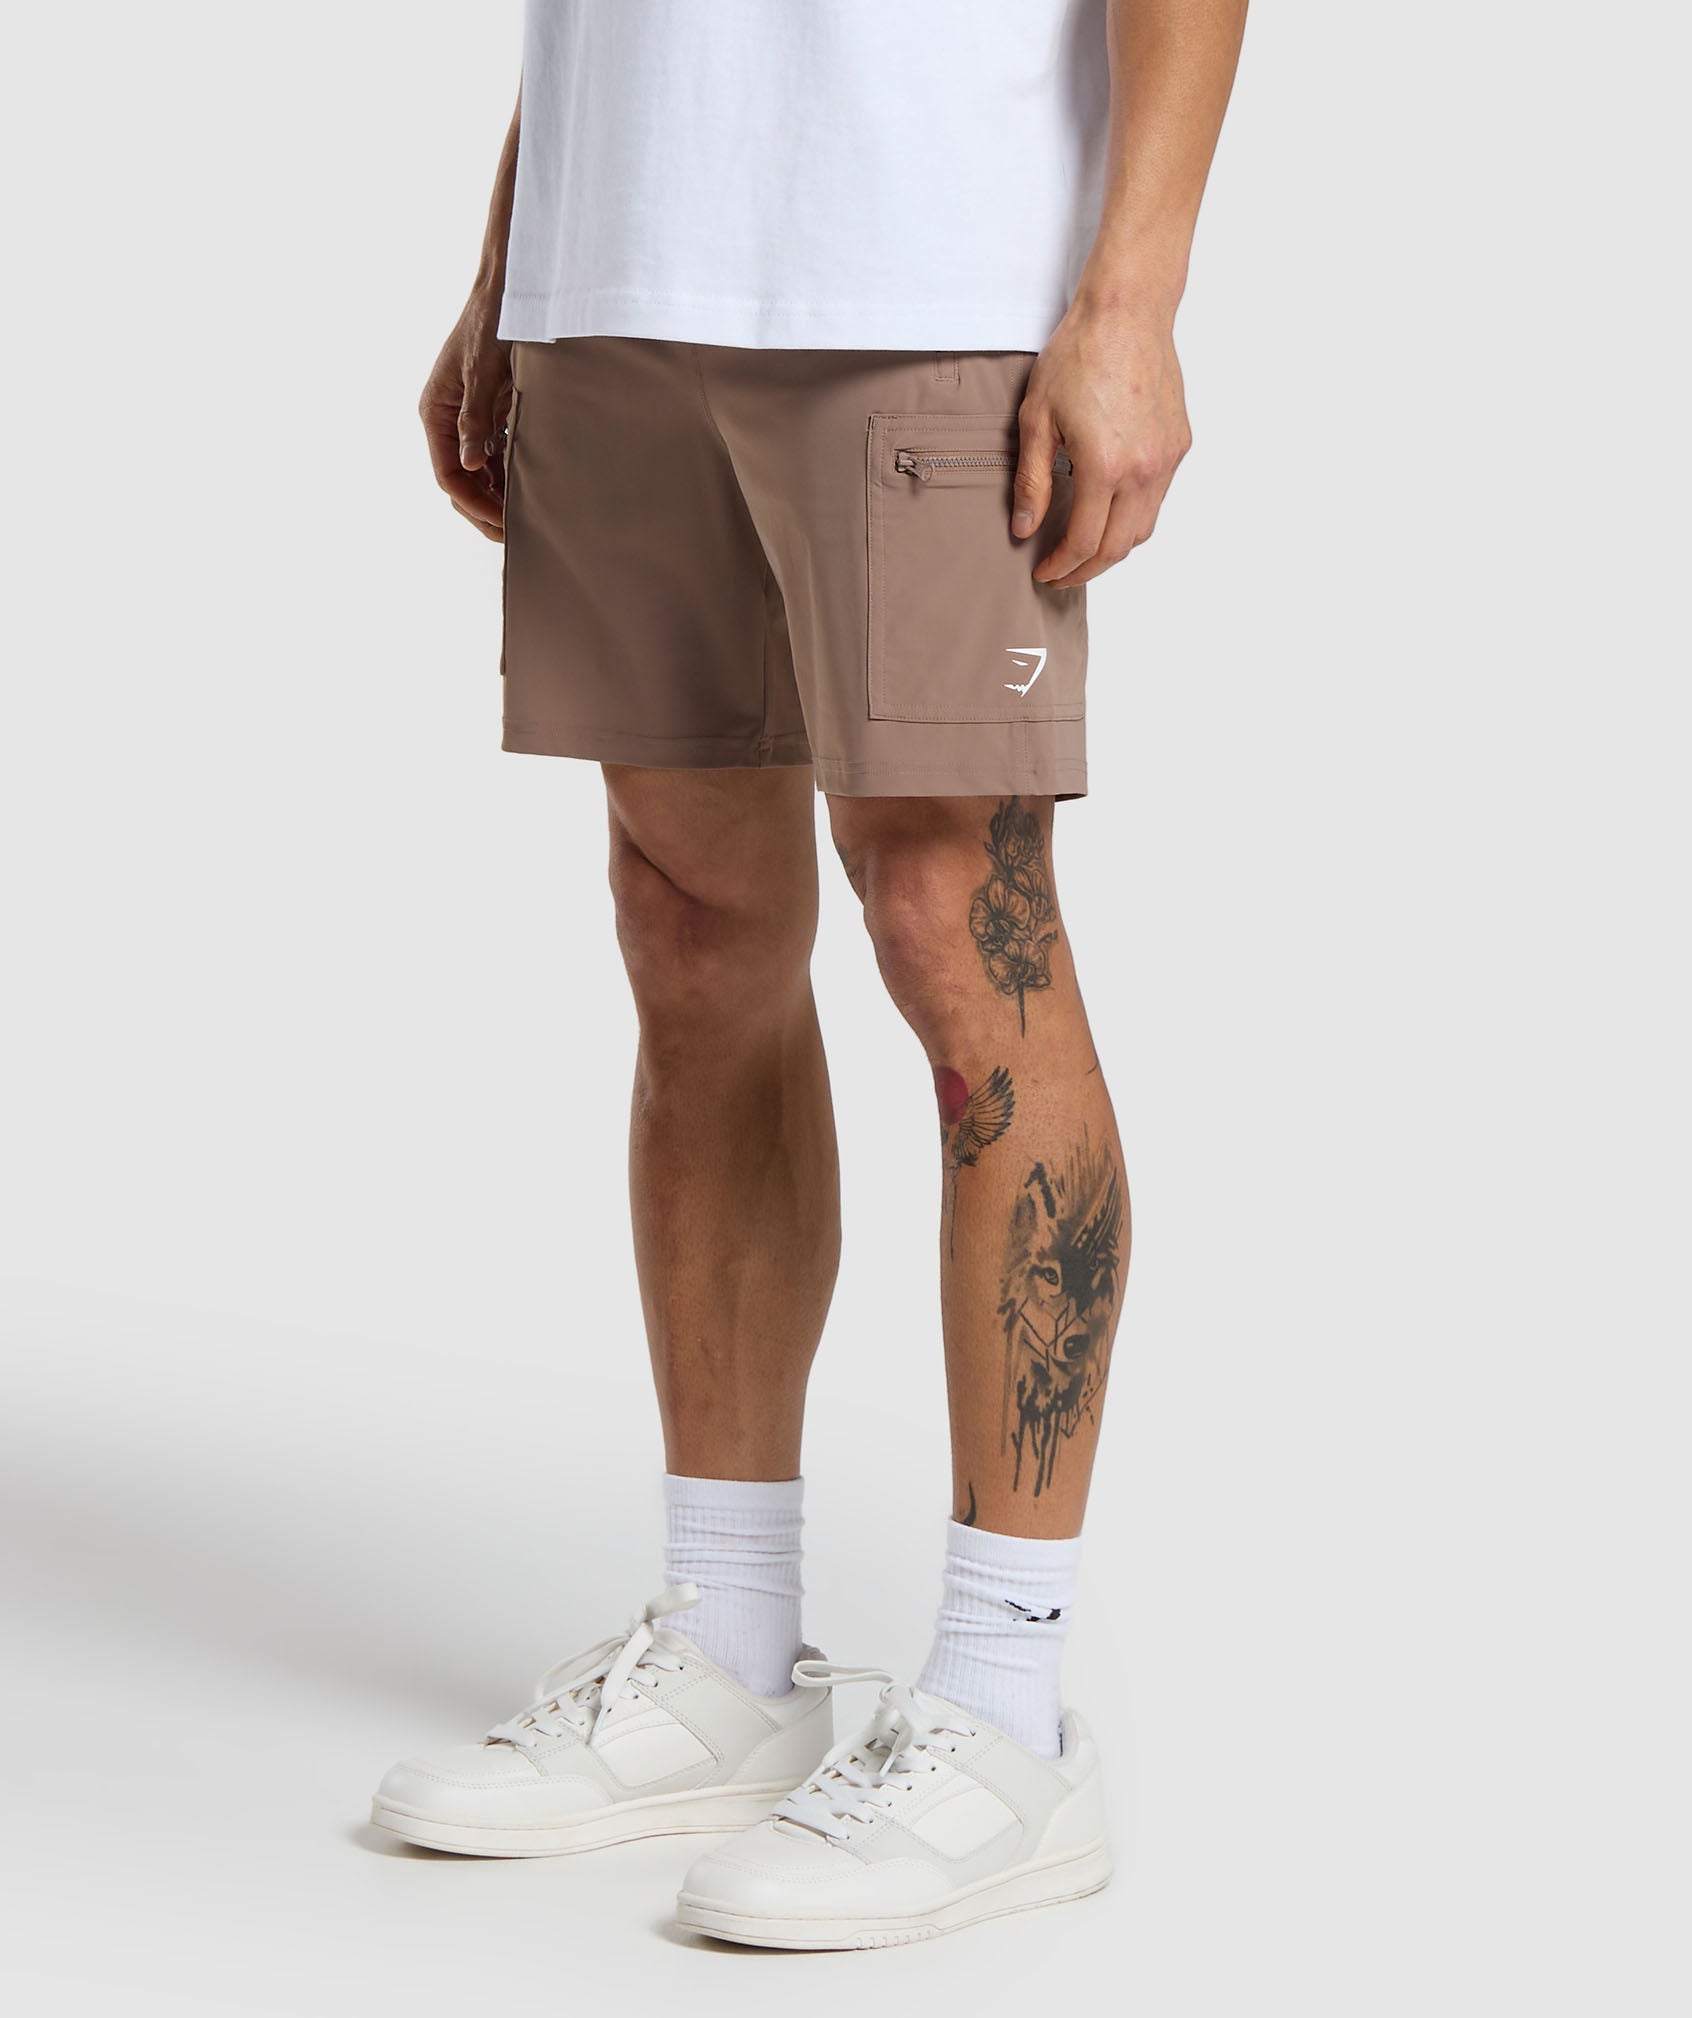 Rest Day 6" Cargo Shorts in Mocha Mauve - view 1